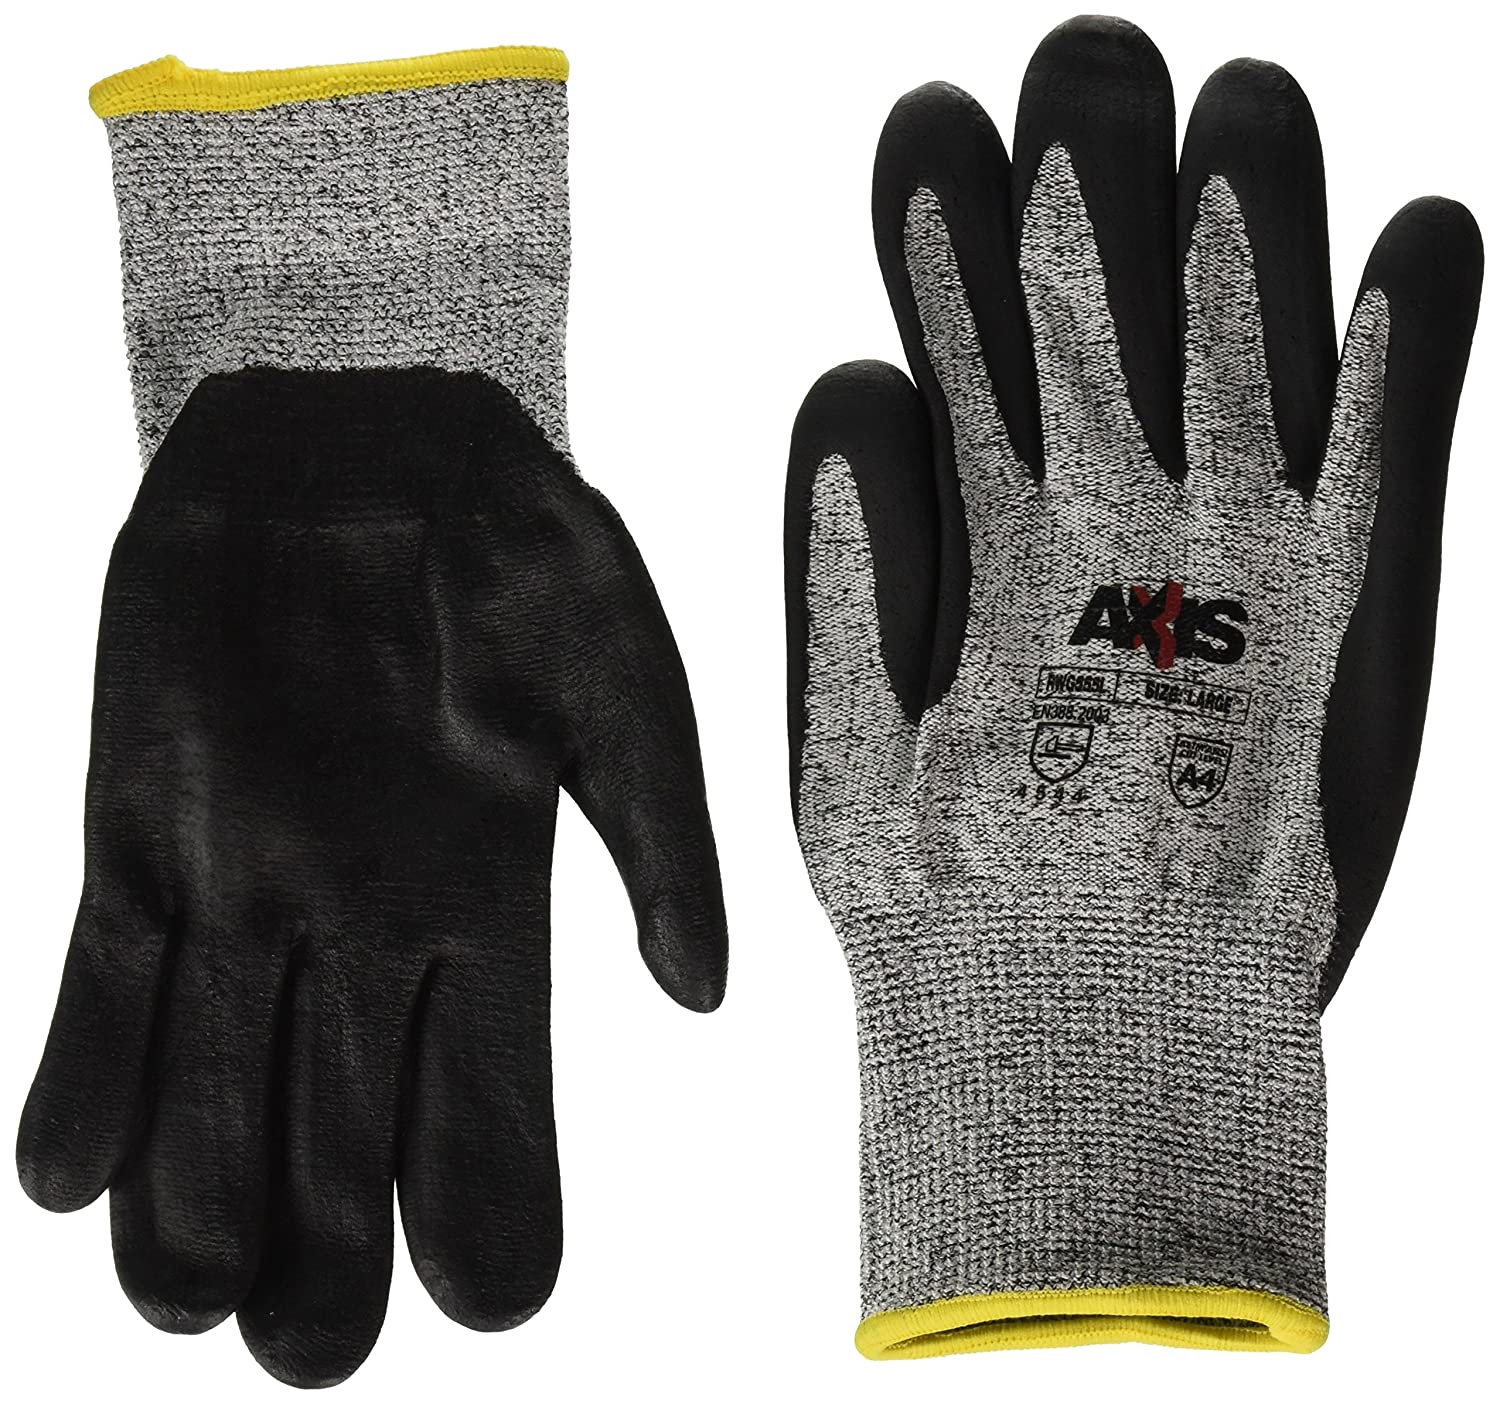 Axis Cut Protection Level A4 Work Glove 13 Gauge Large